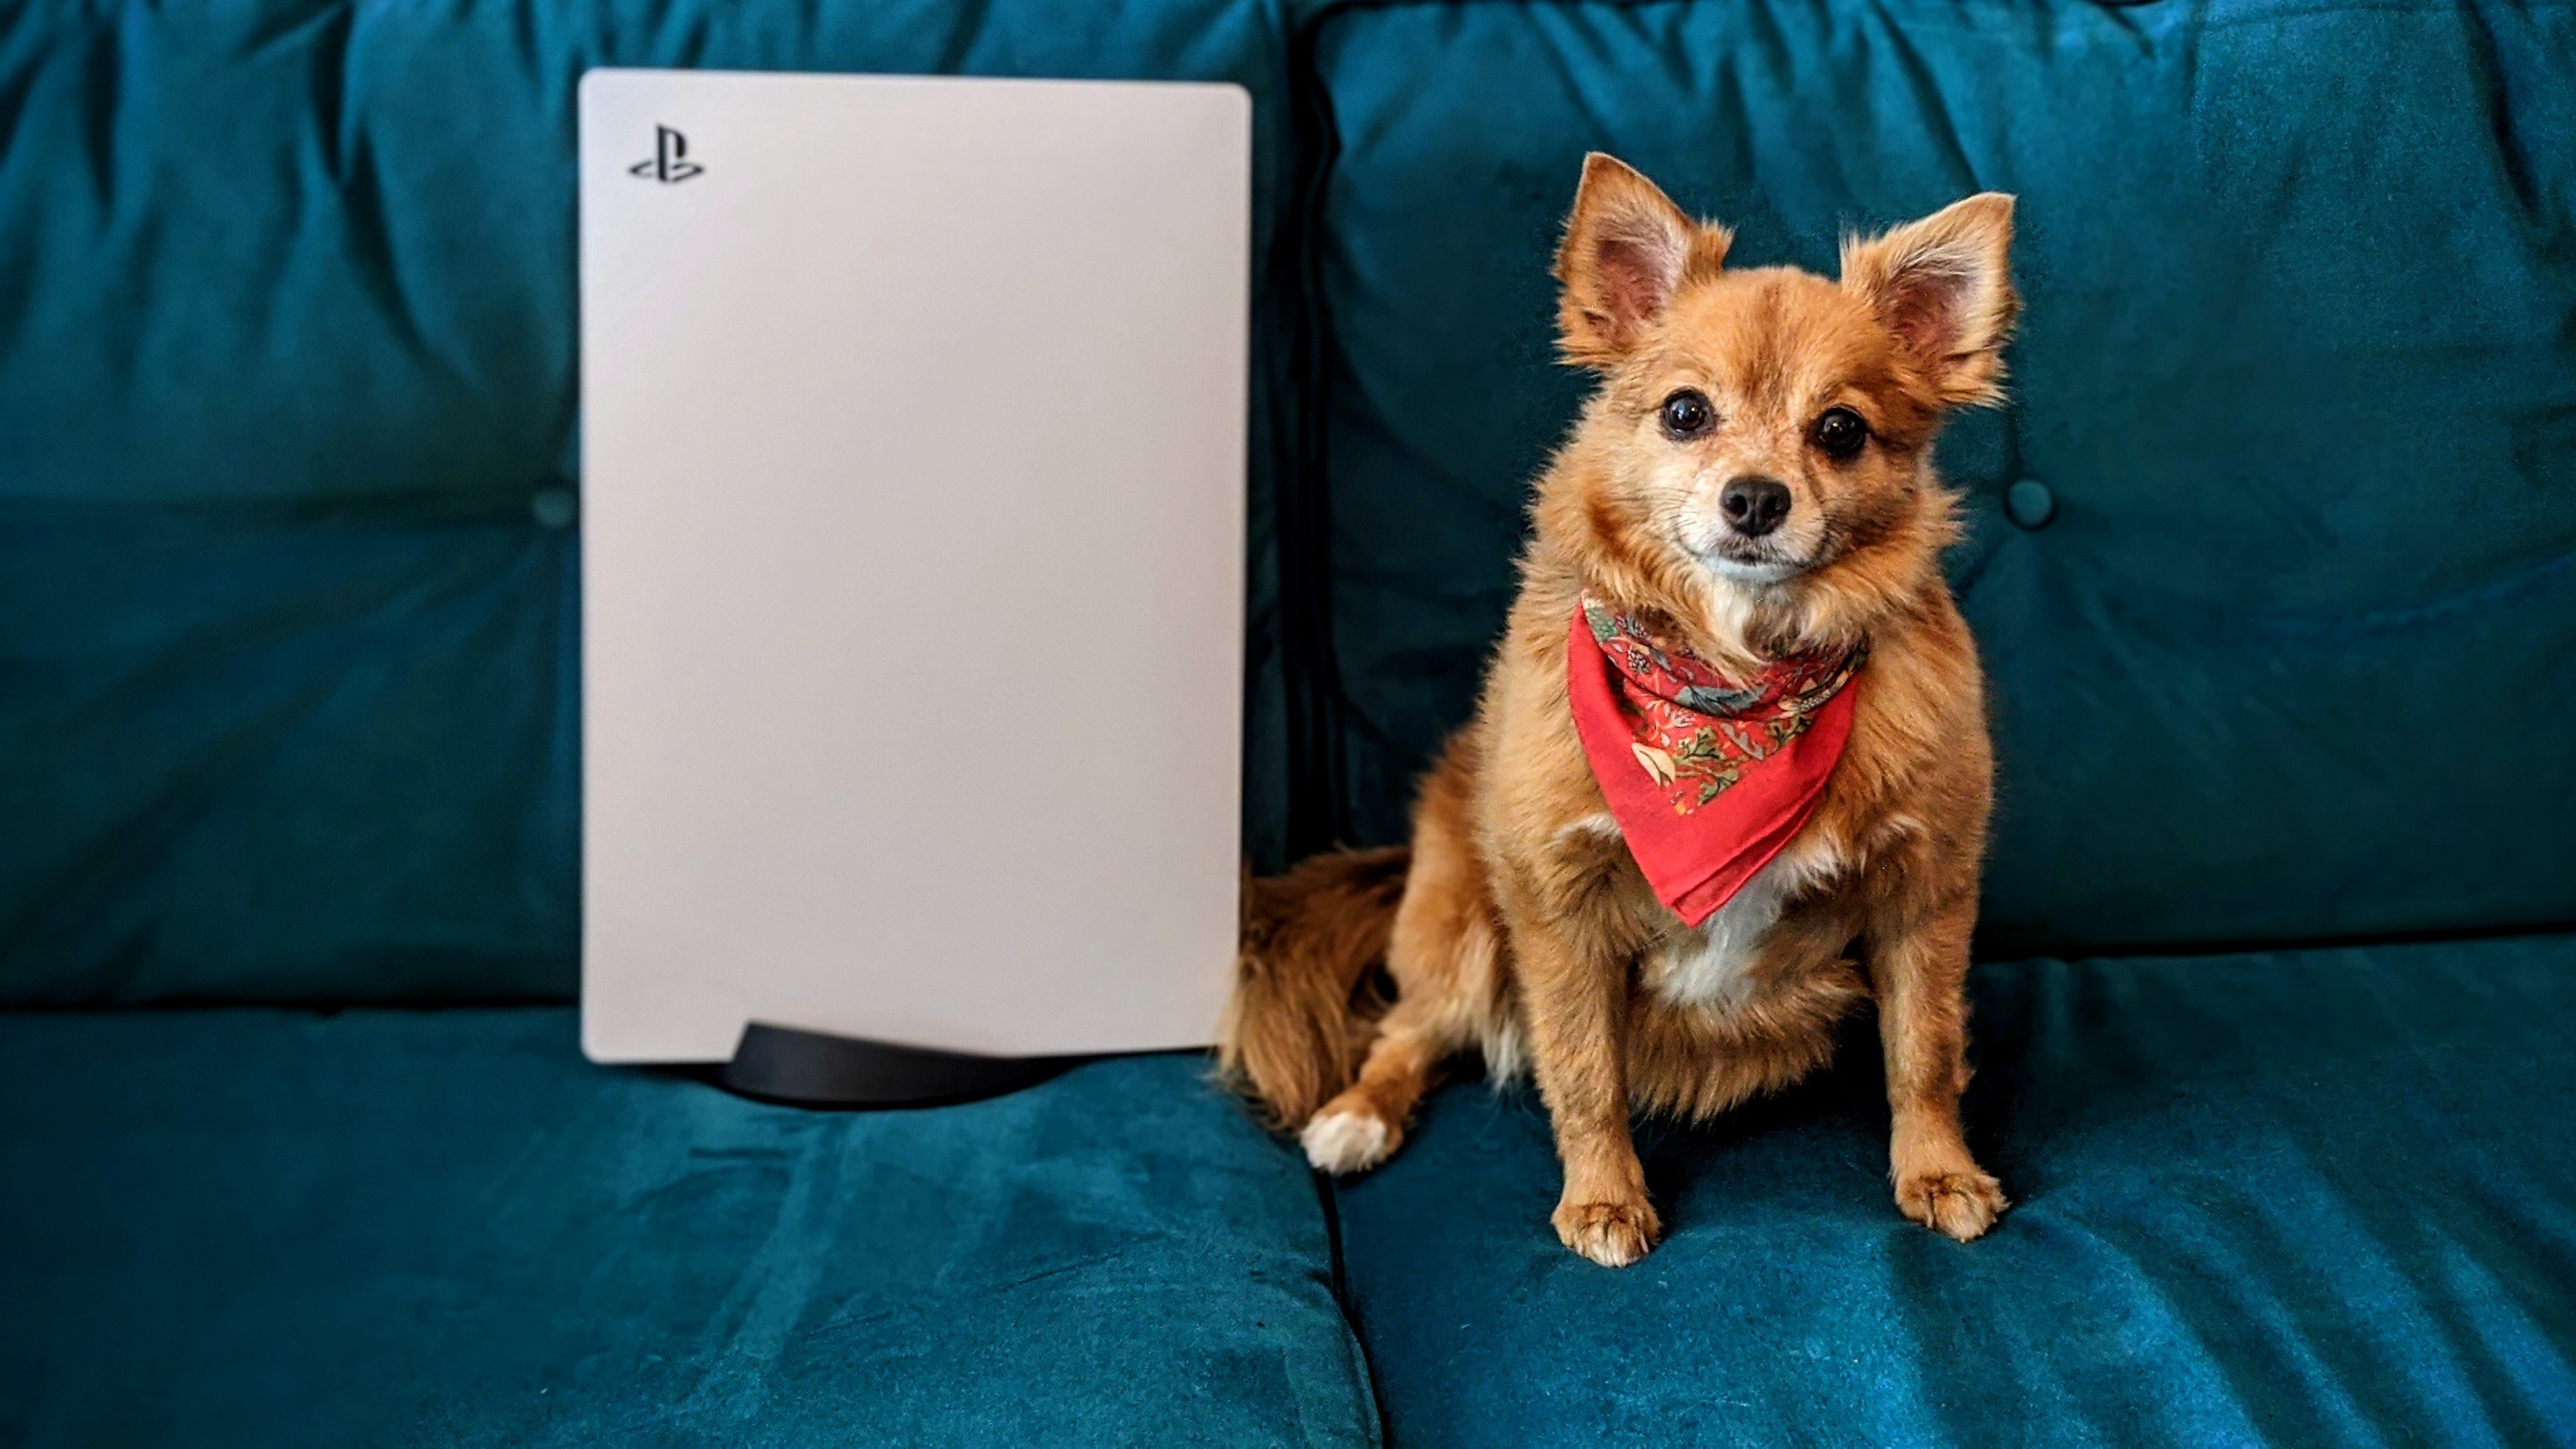 ps5 news headlines - dog sitting next to a ps5